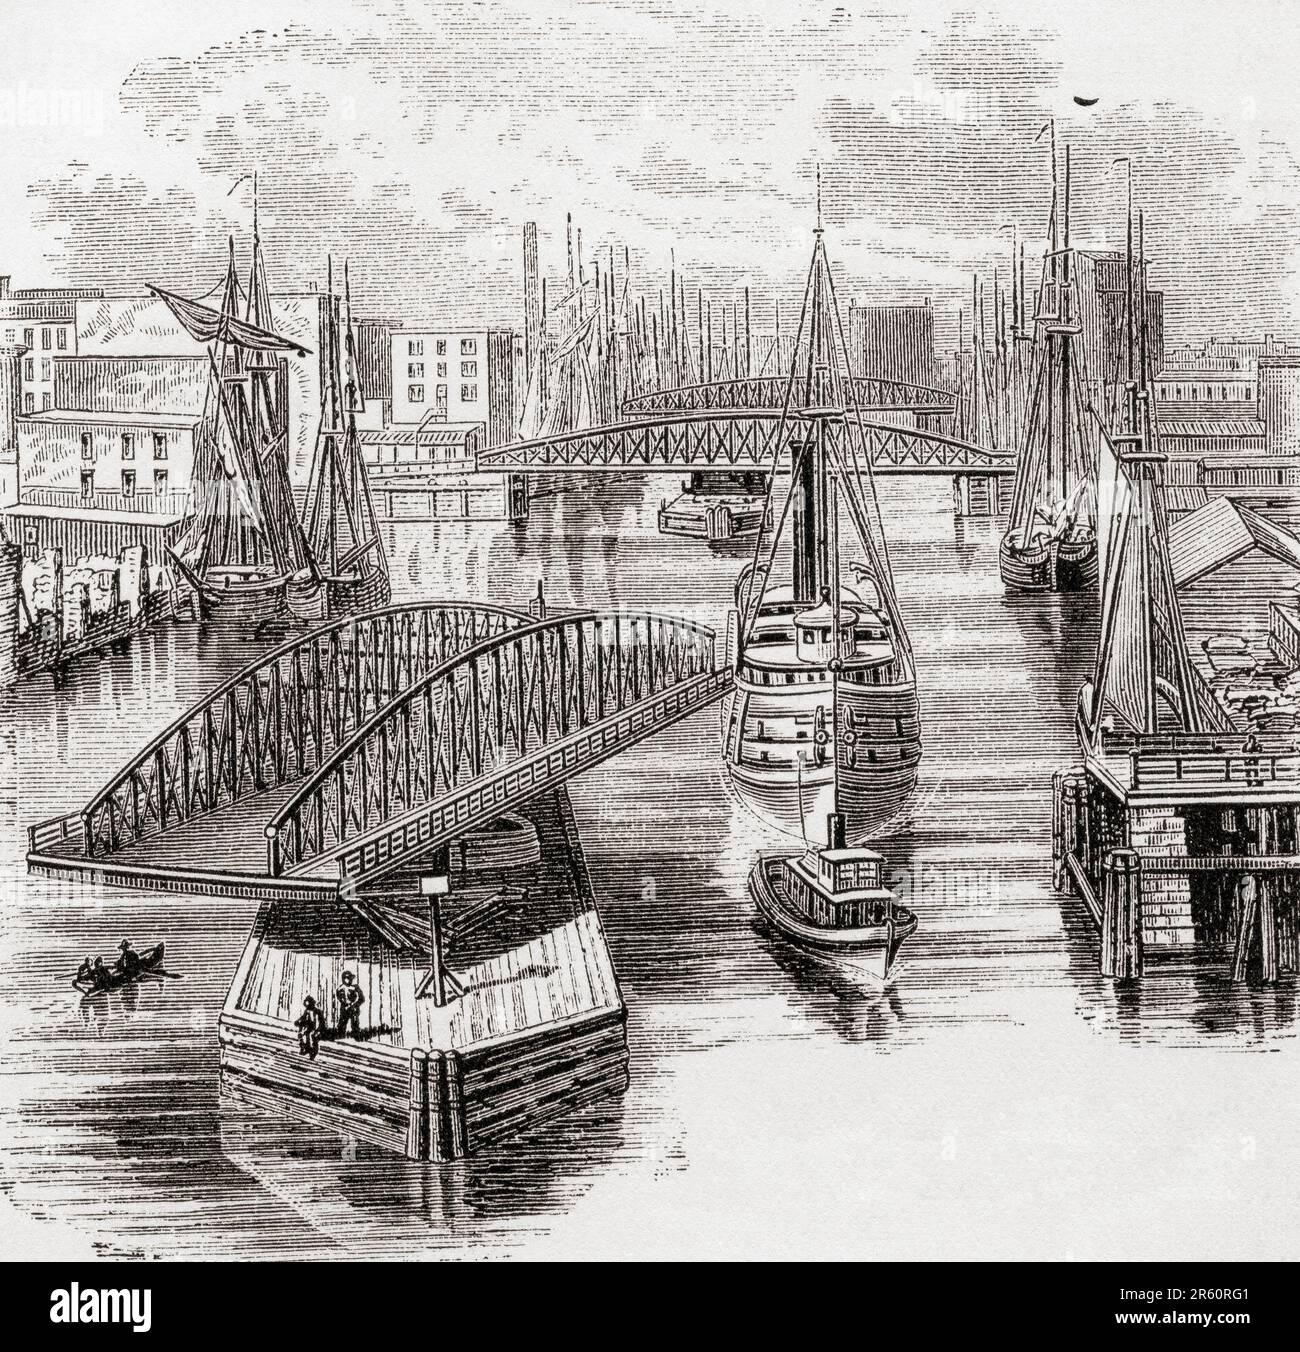 Swinging bridges over the Chicago River, USA, seen here in the 19th century.  From America Revisited: From The Bay of New York to The Gulf of Mexico, published 1886. Stock Photo